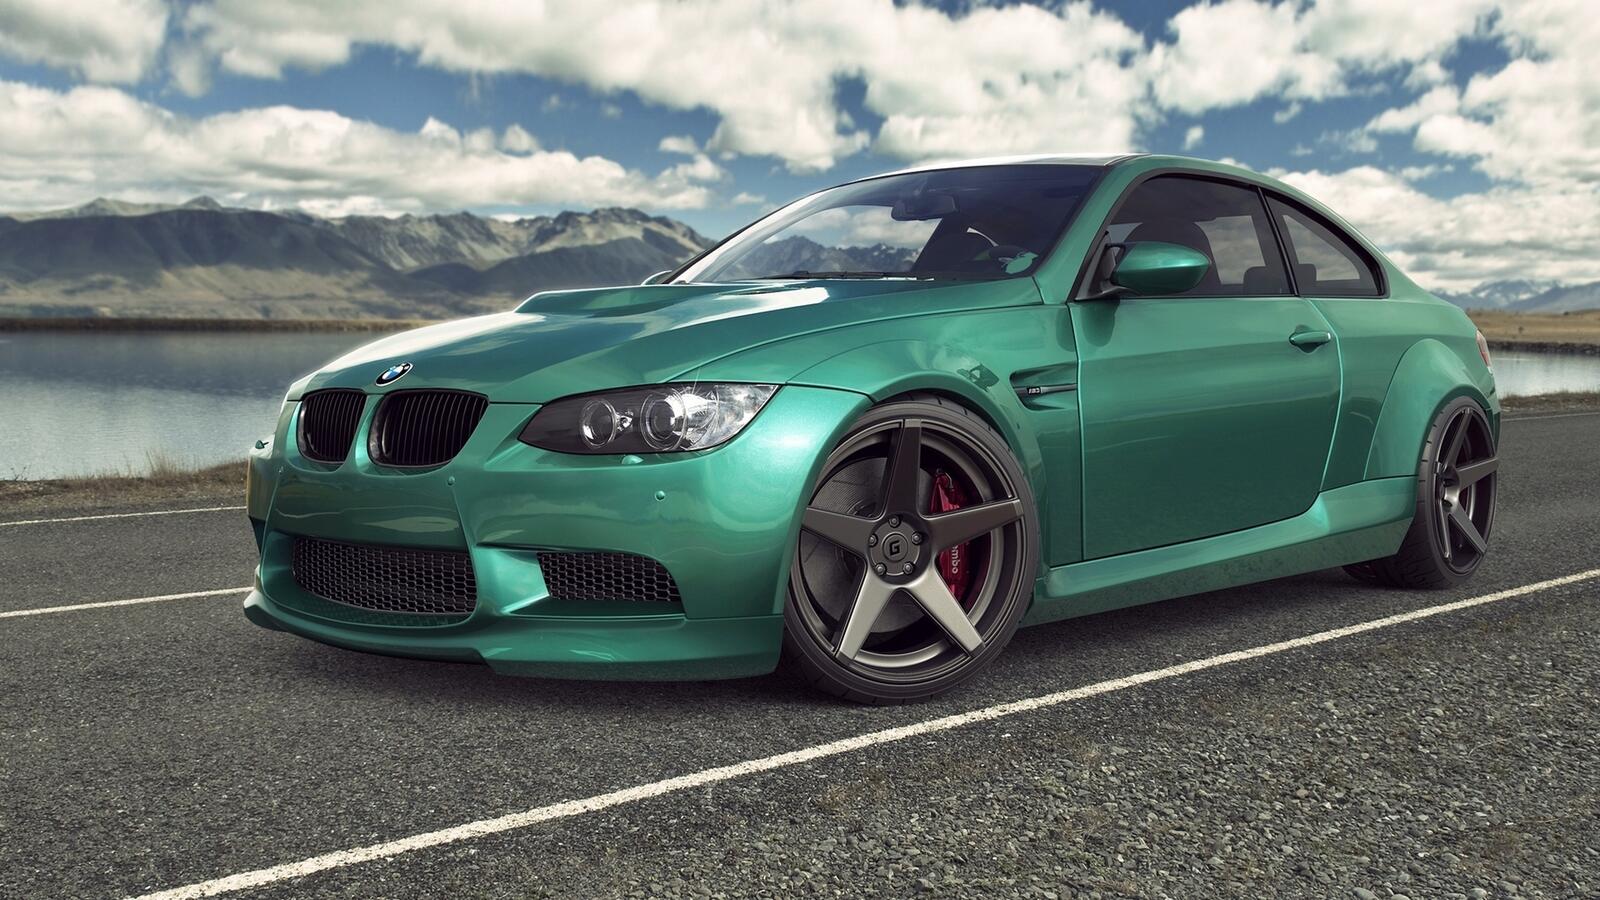 Free photo BMW M3 in an unusual color